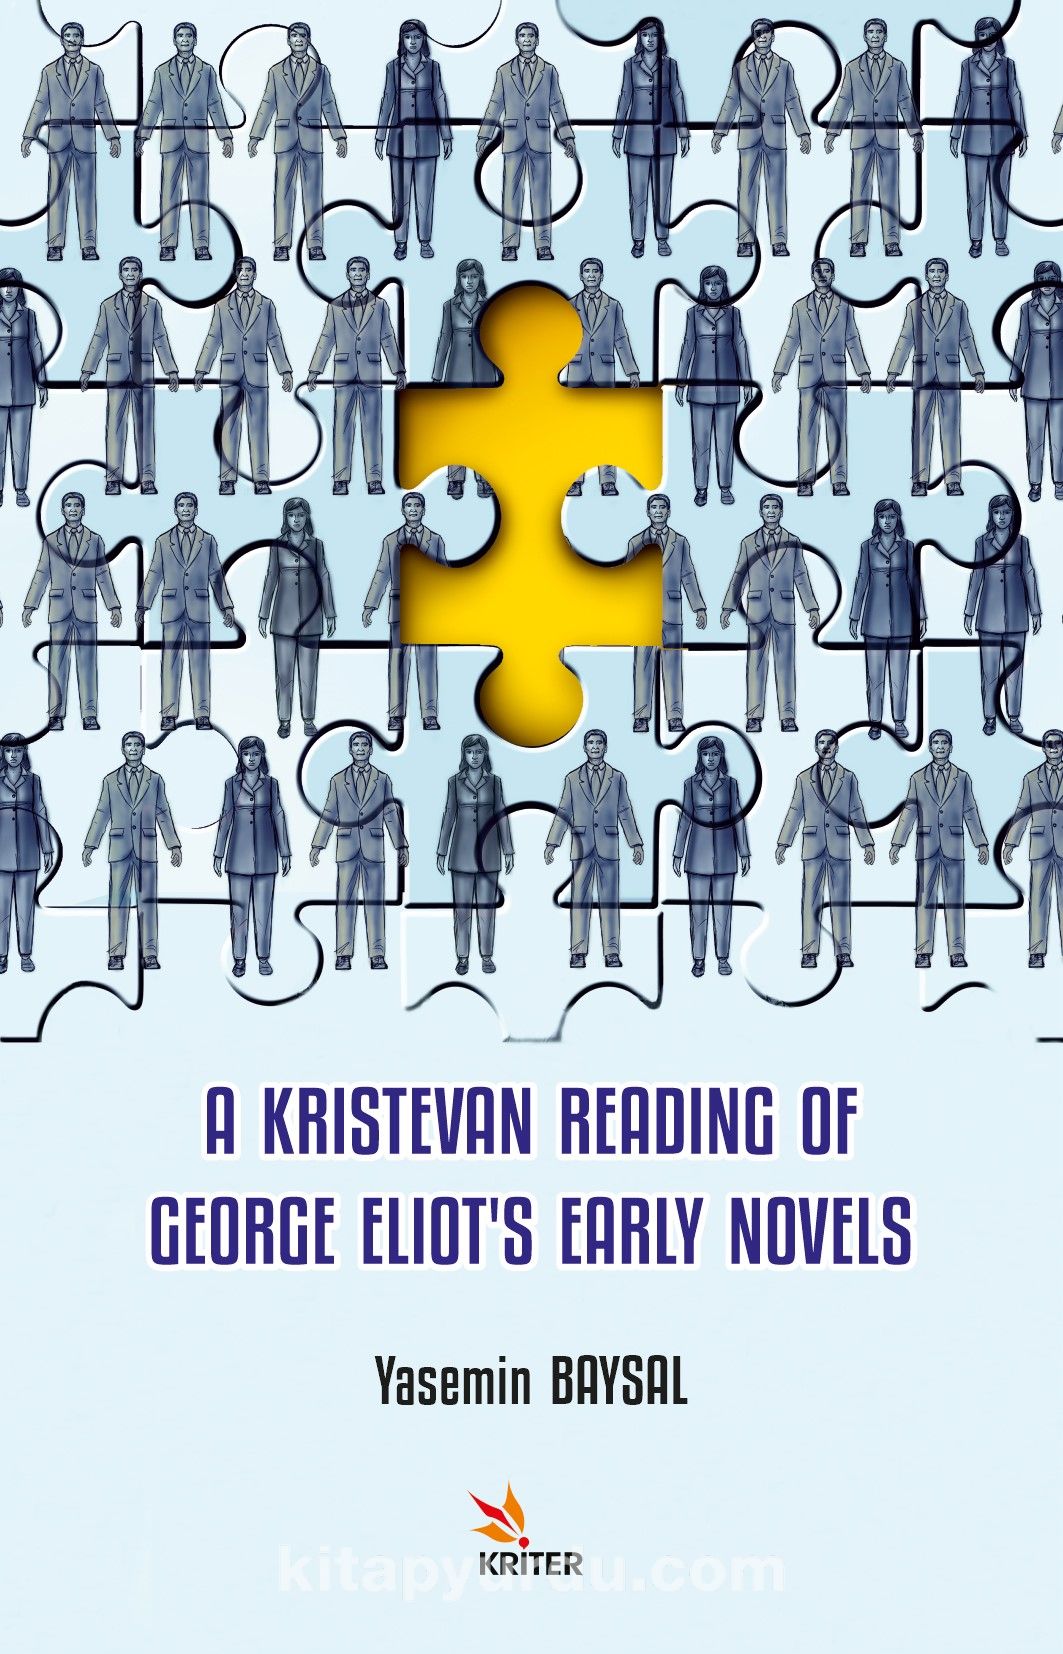 A Kristevan Reading Of George Eliot’s Early Novels